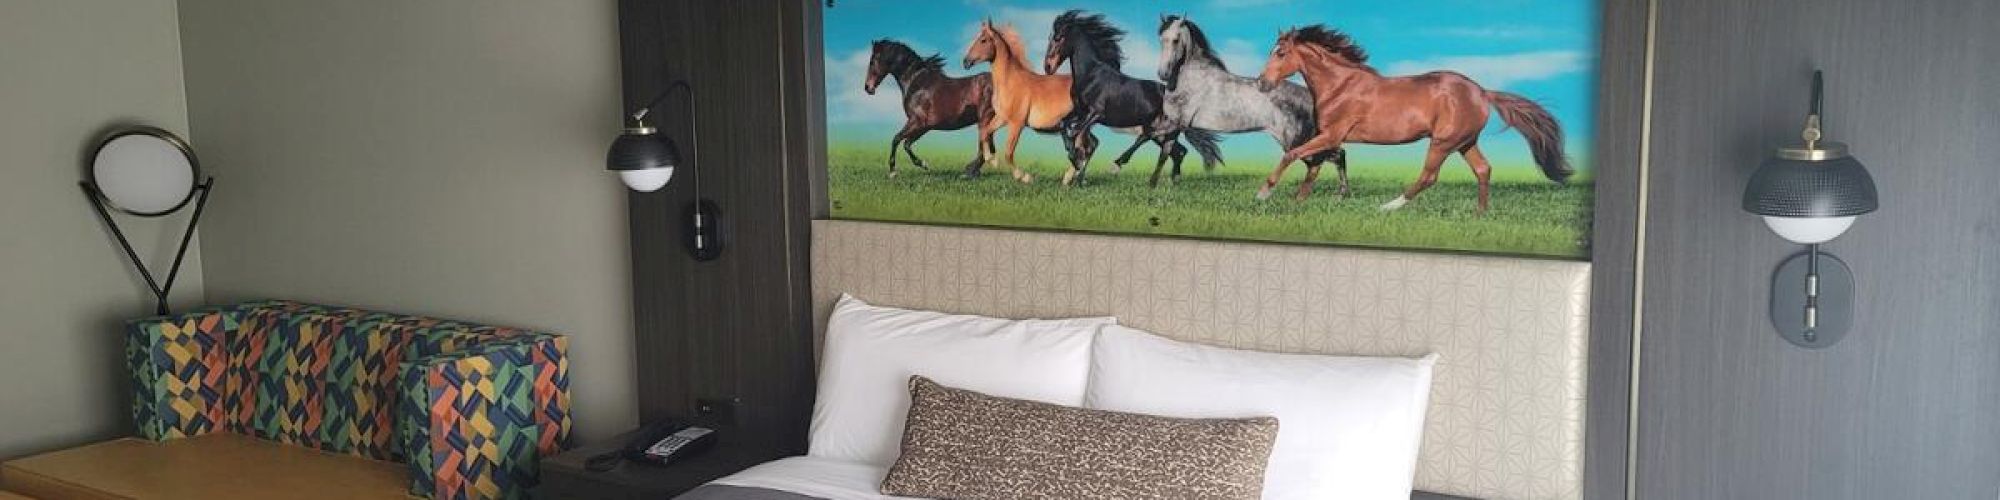 A hotel room with a large bed, wall artwork featuring horses, a colorful sofa, two orange ottomans, bedside lamps, and a modern decor theme.